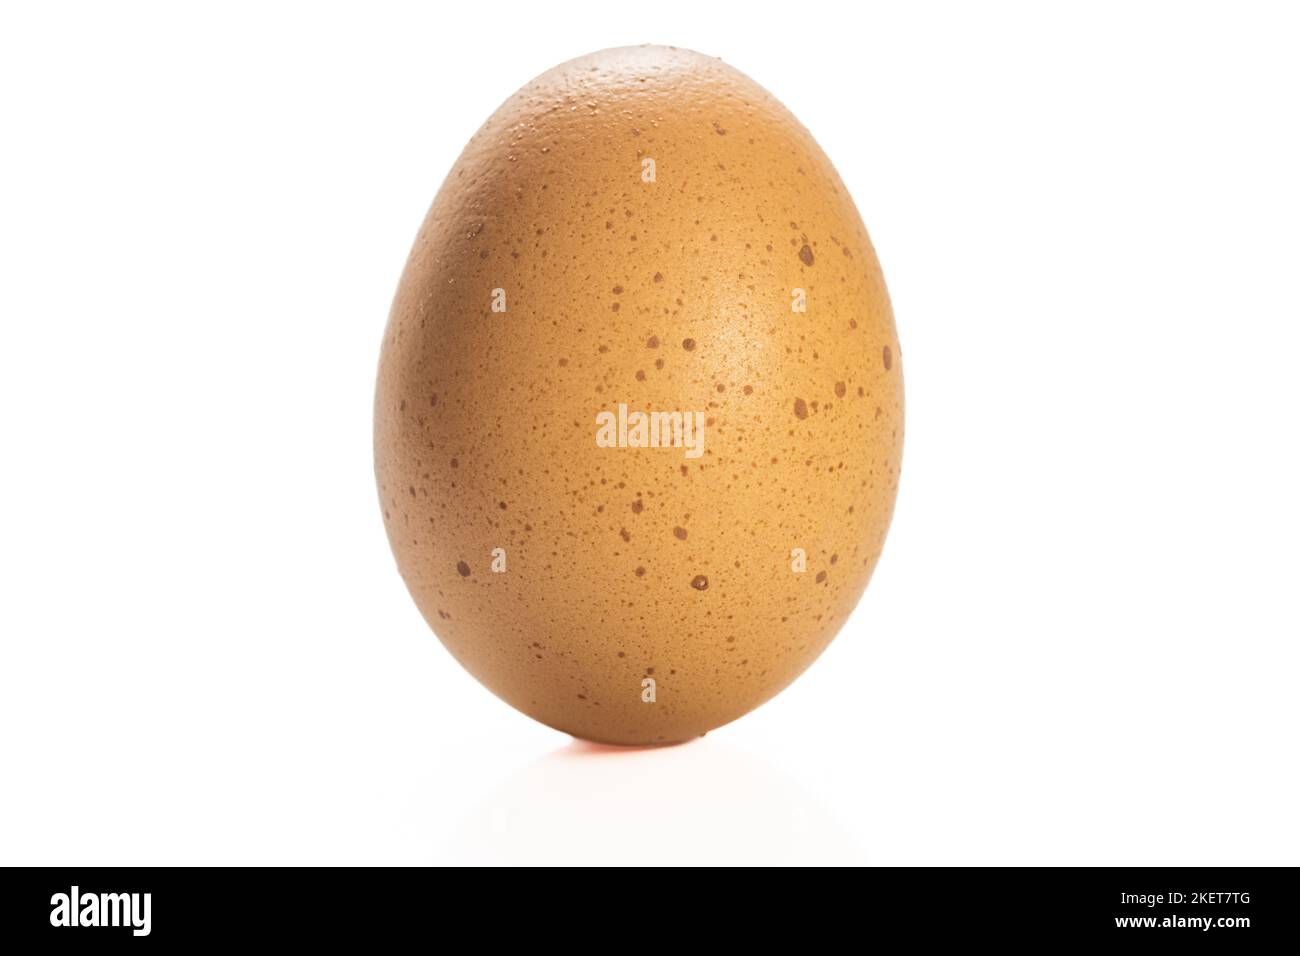 A single brown speckled egg on a white background Stock Photo